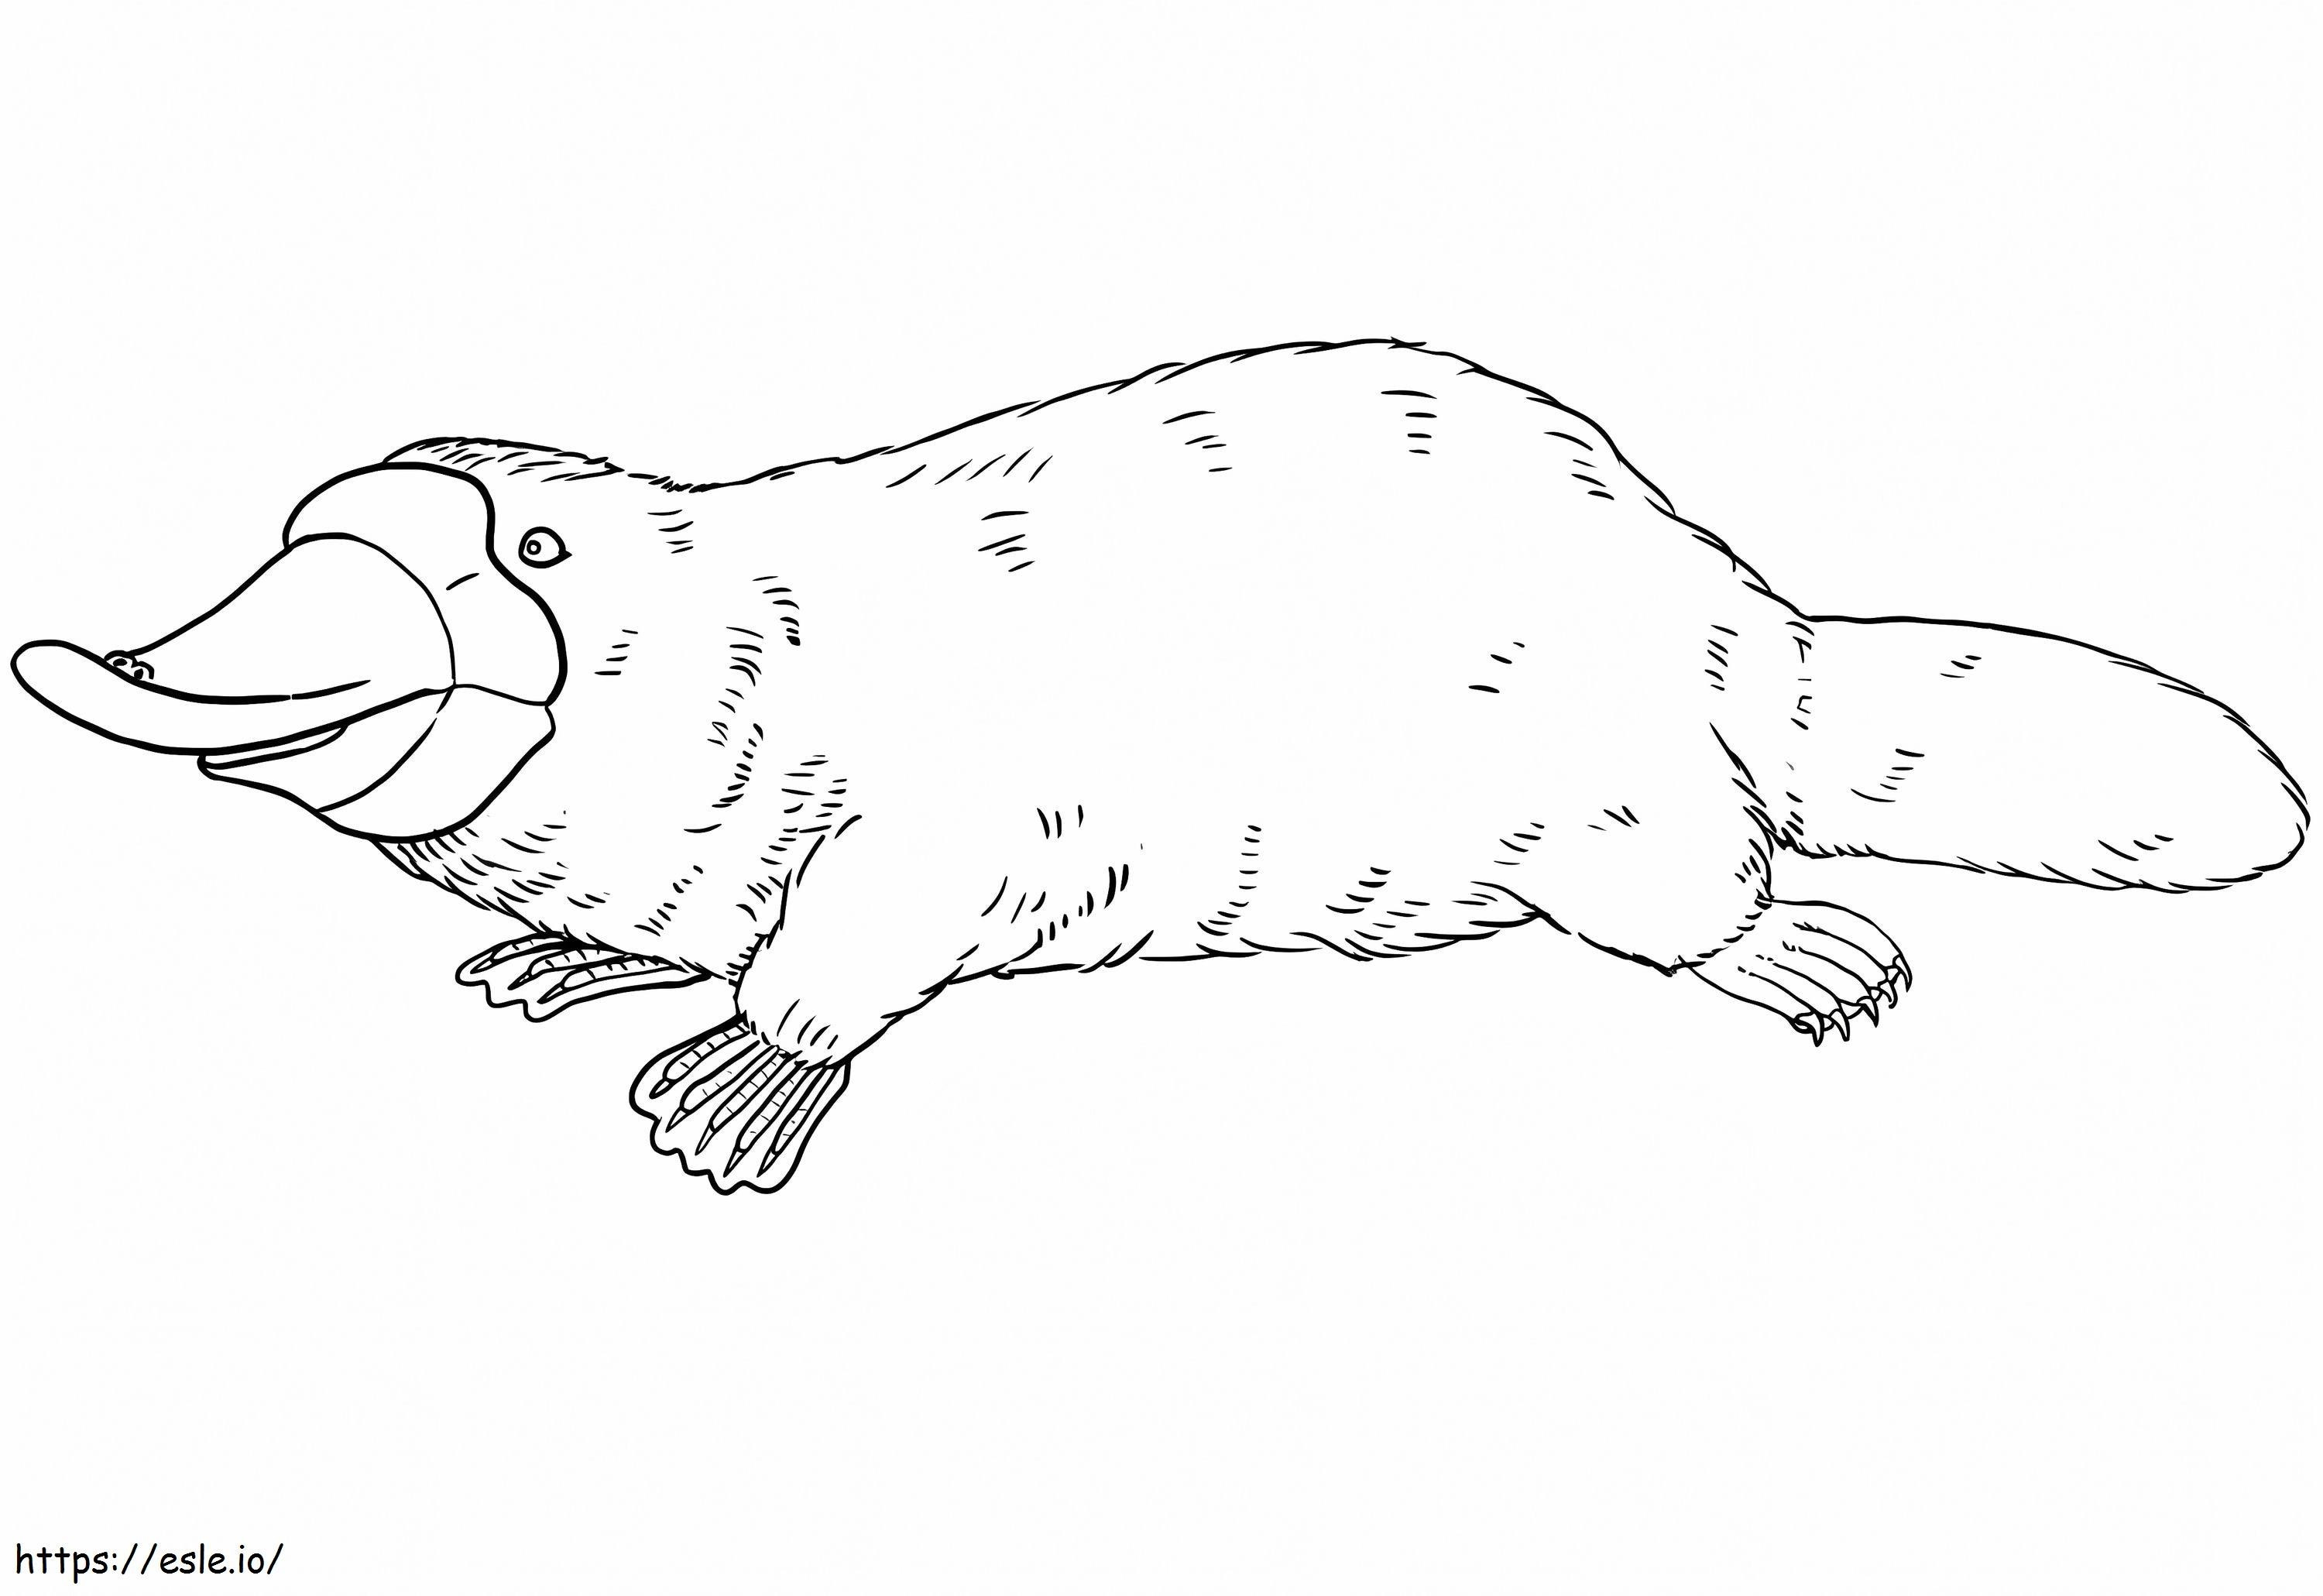 Duck Billed Platypus coloring page